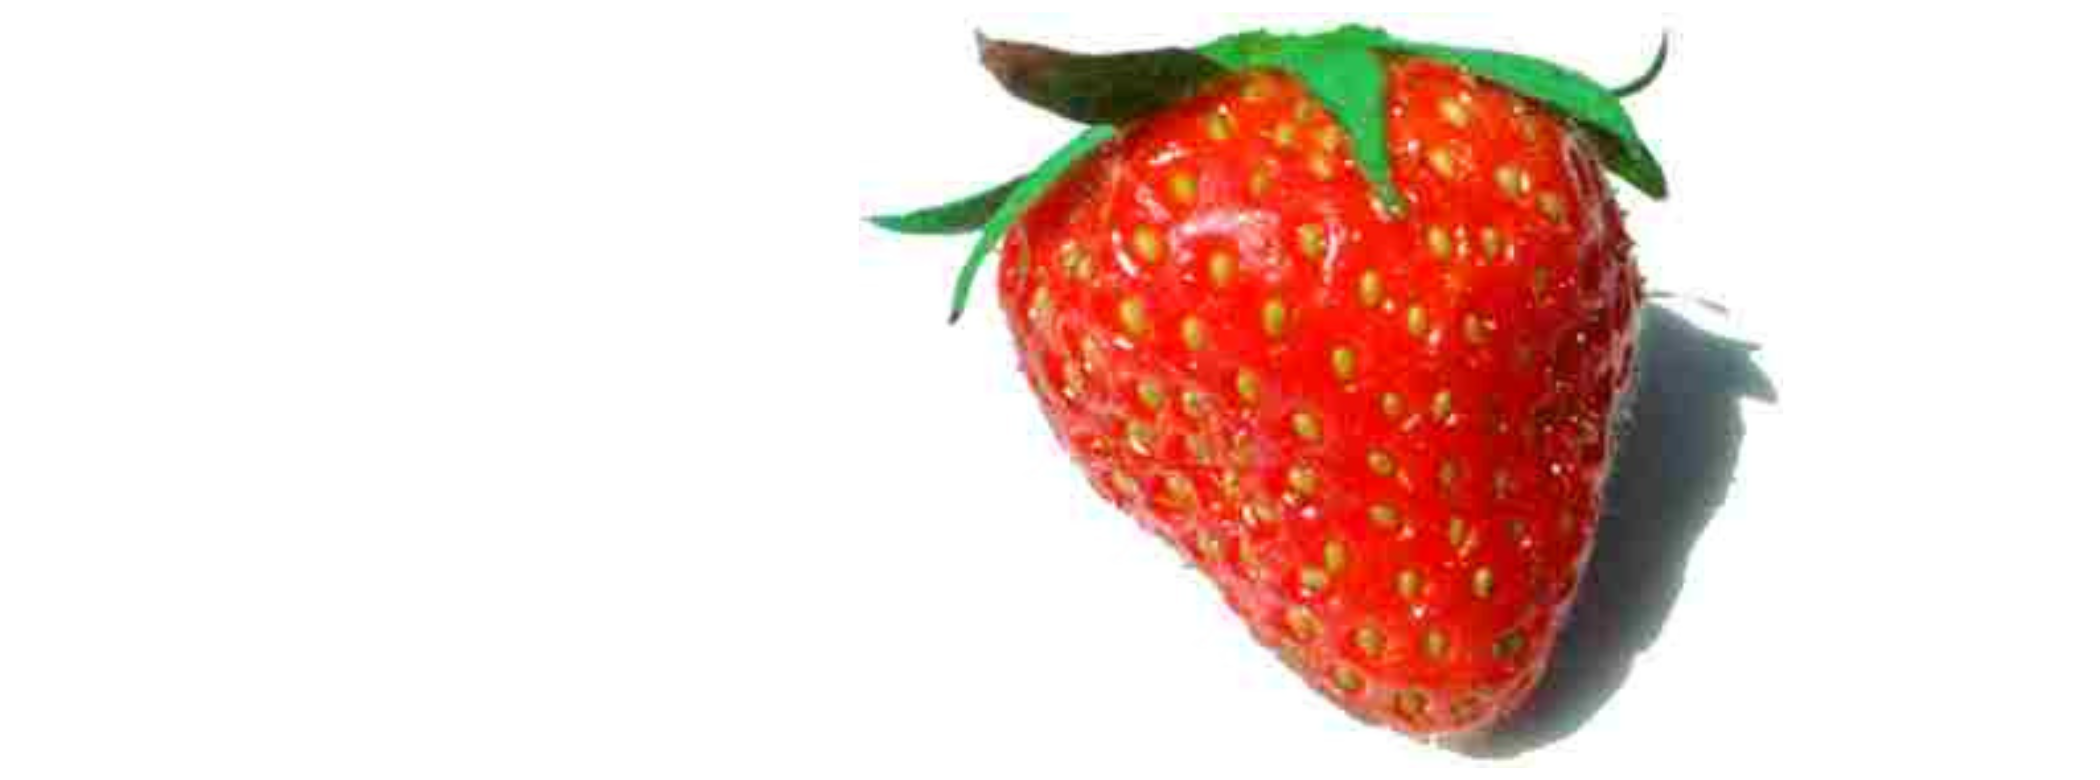 A bright red strawberry with a green top against a white background.